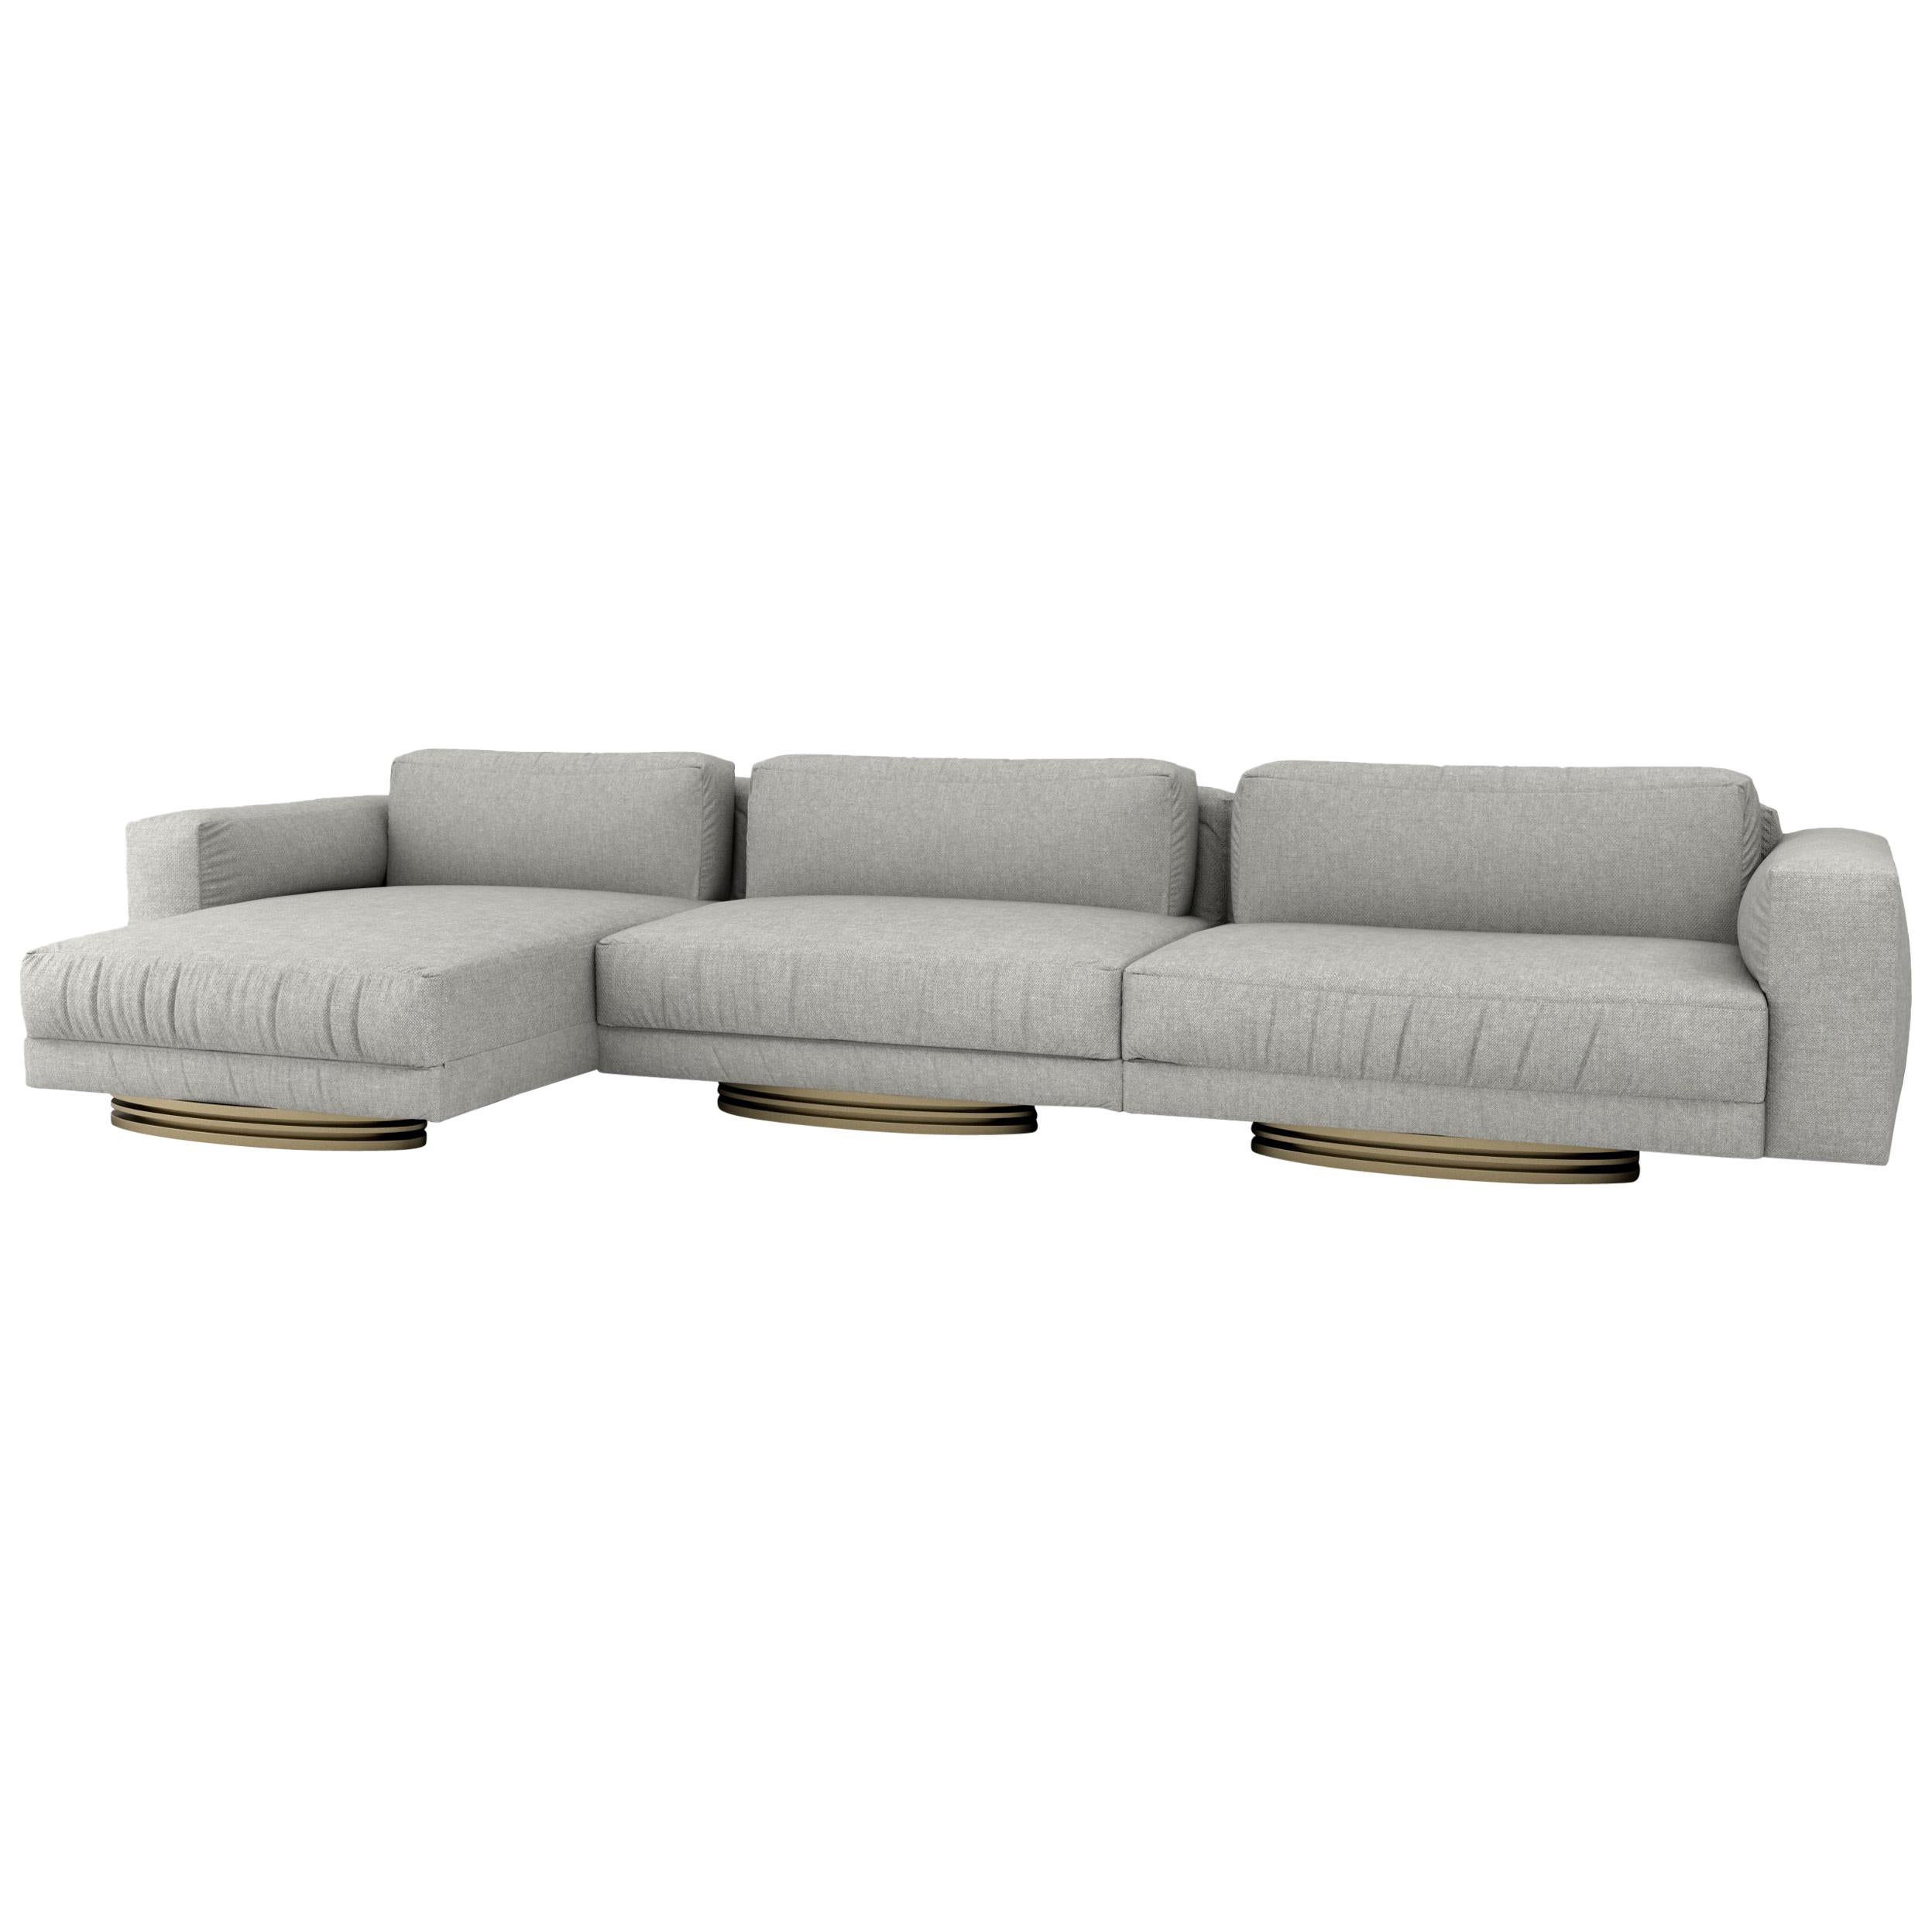 BOLSA SECTIONAL CHASE - Modern Design in Cotton with Metallic High Gloss Bases